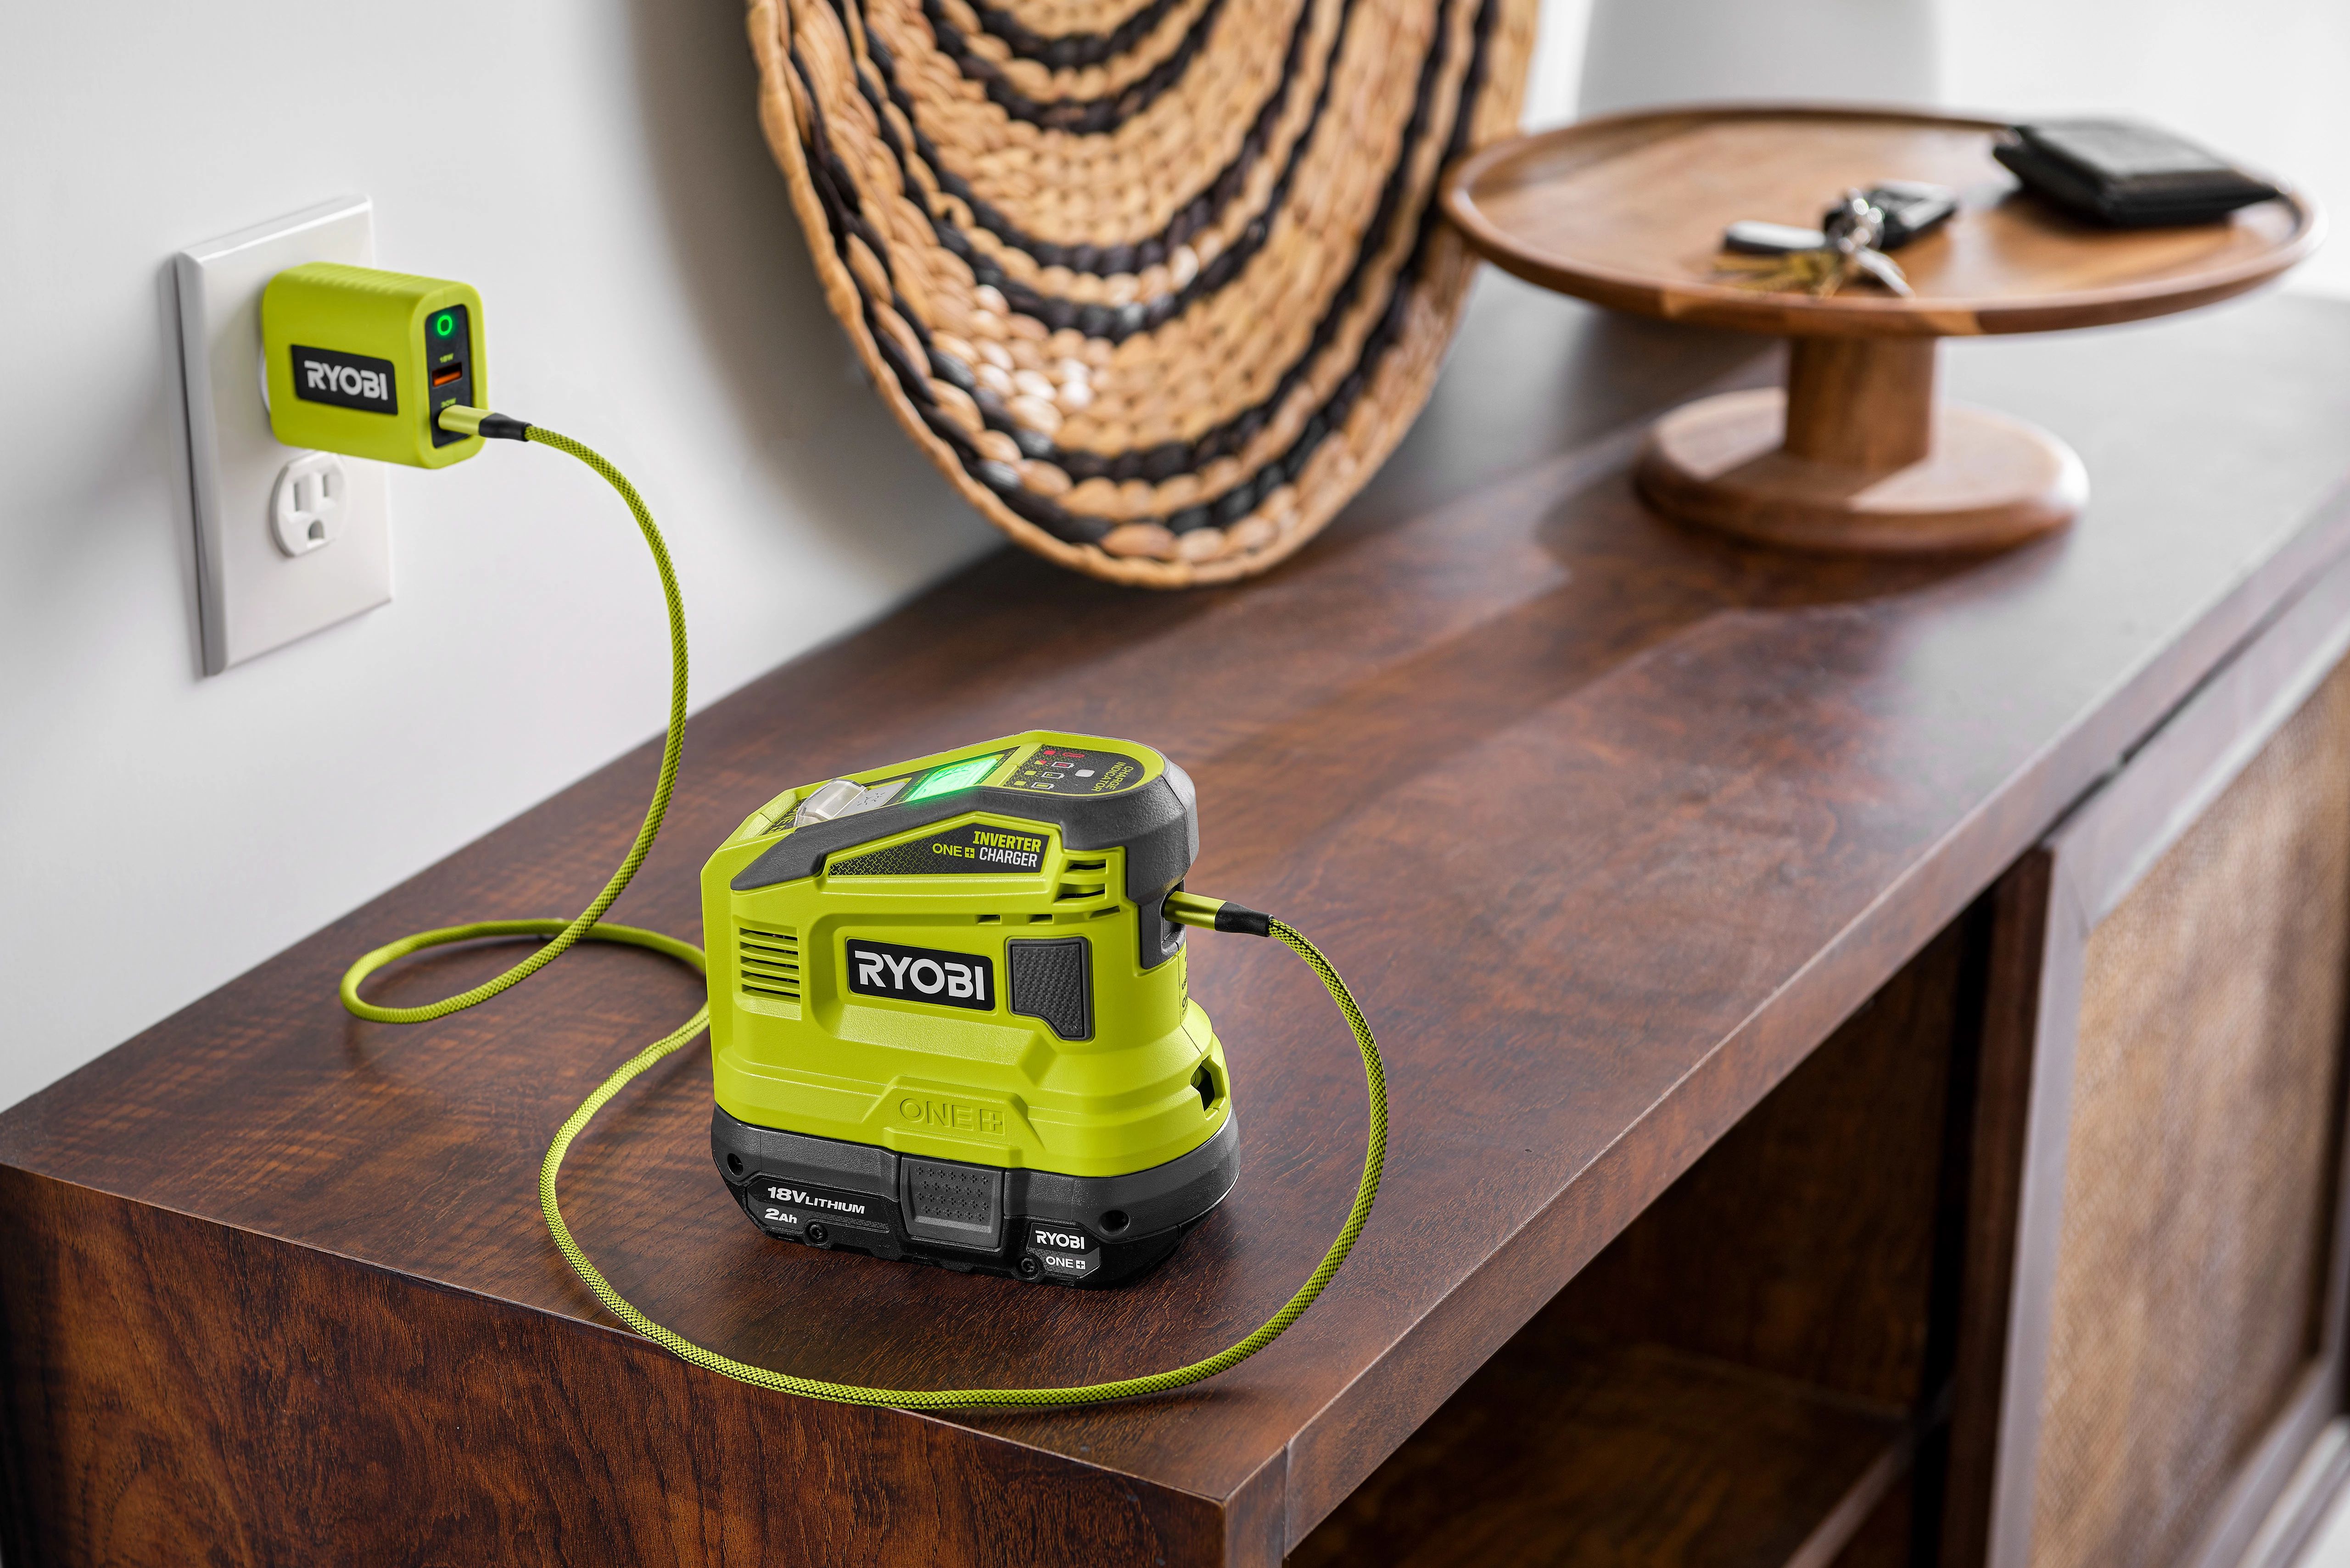 Charges All RYOBI One+ 18-Volt batteries